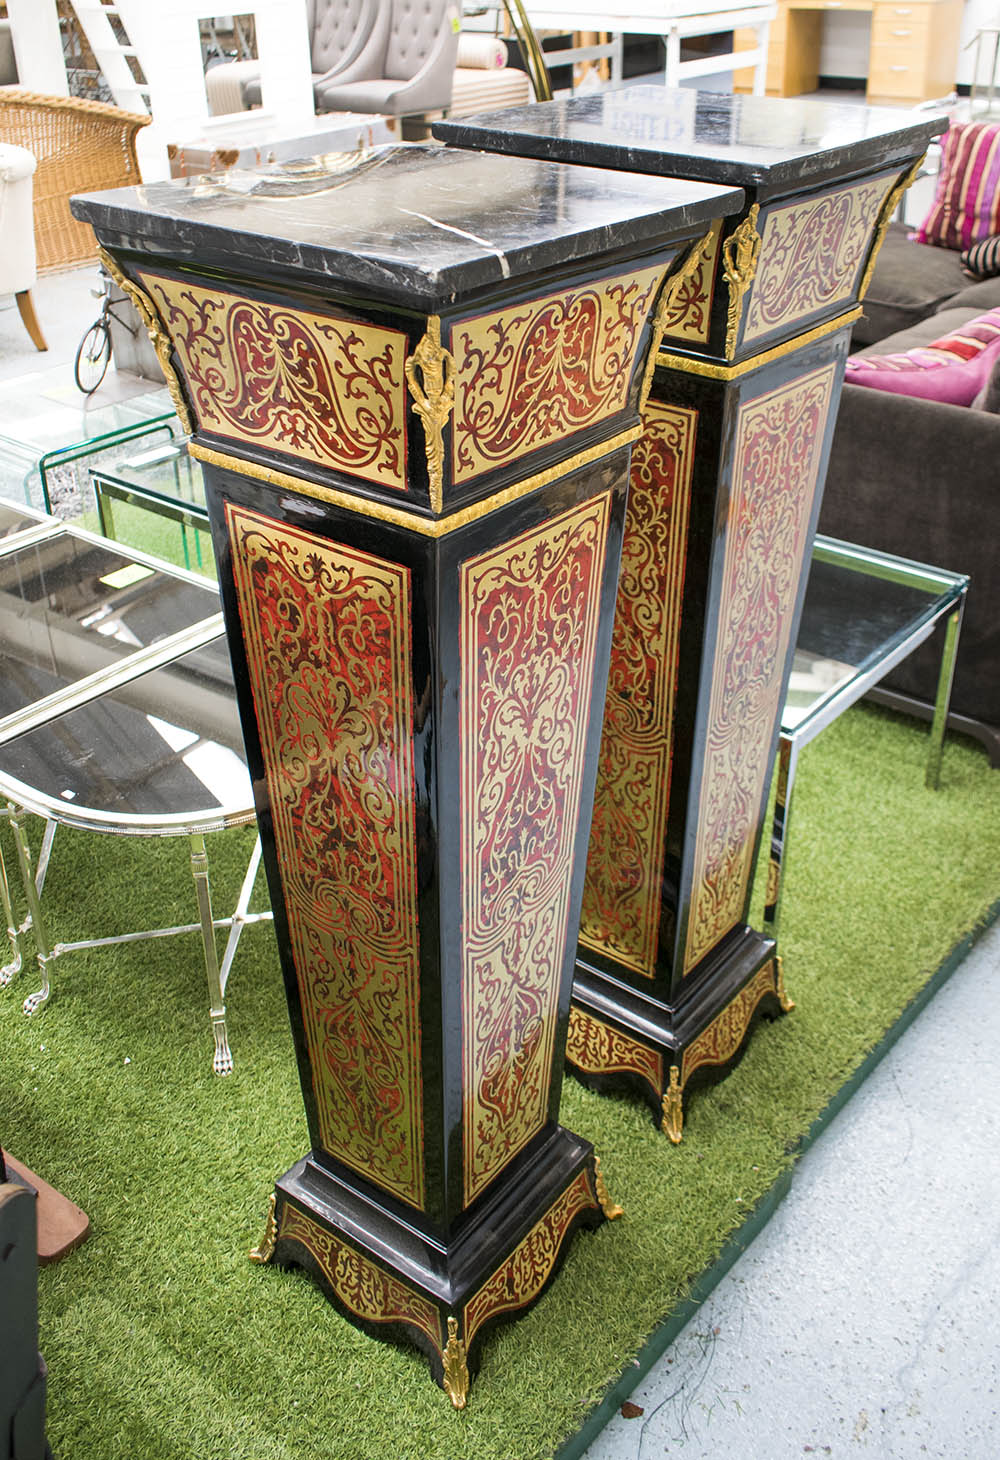 PEDESTALS, a pair, Boulle style with marble tops, 39cm x 39cm x 125cm H.